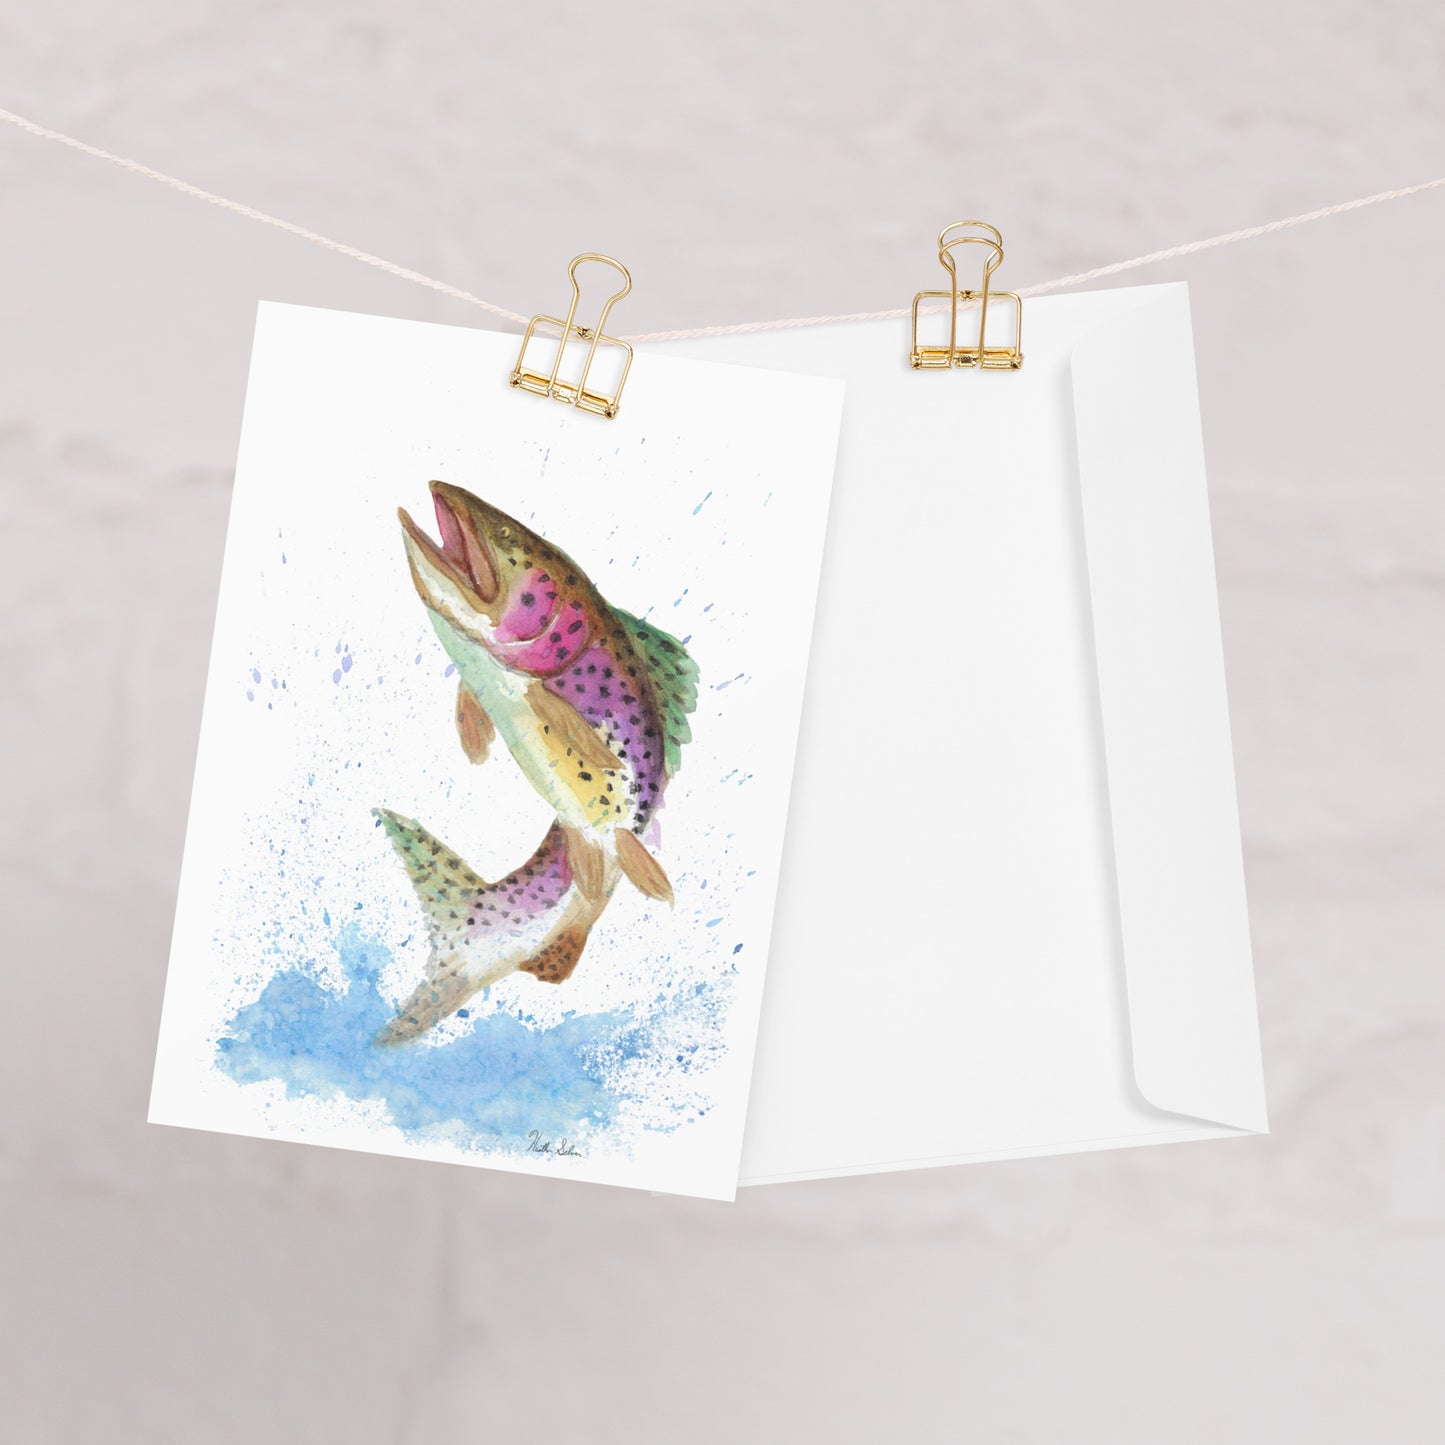 Ten greeting cards with print of watercolor rainbow trout on the front. Inside is blank. Comes with envelopes. Cards measure 5.5 by 8.5 inches. Made with 350 gsm 150lb coated paperboard with vibrant printing. One card shown on clothesline with white envelope.